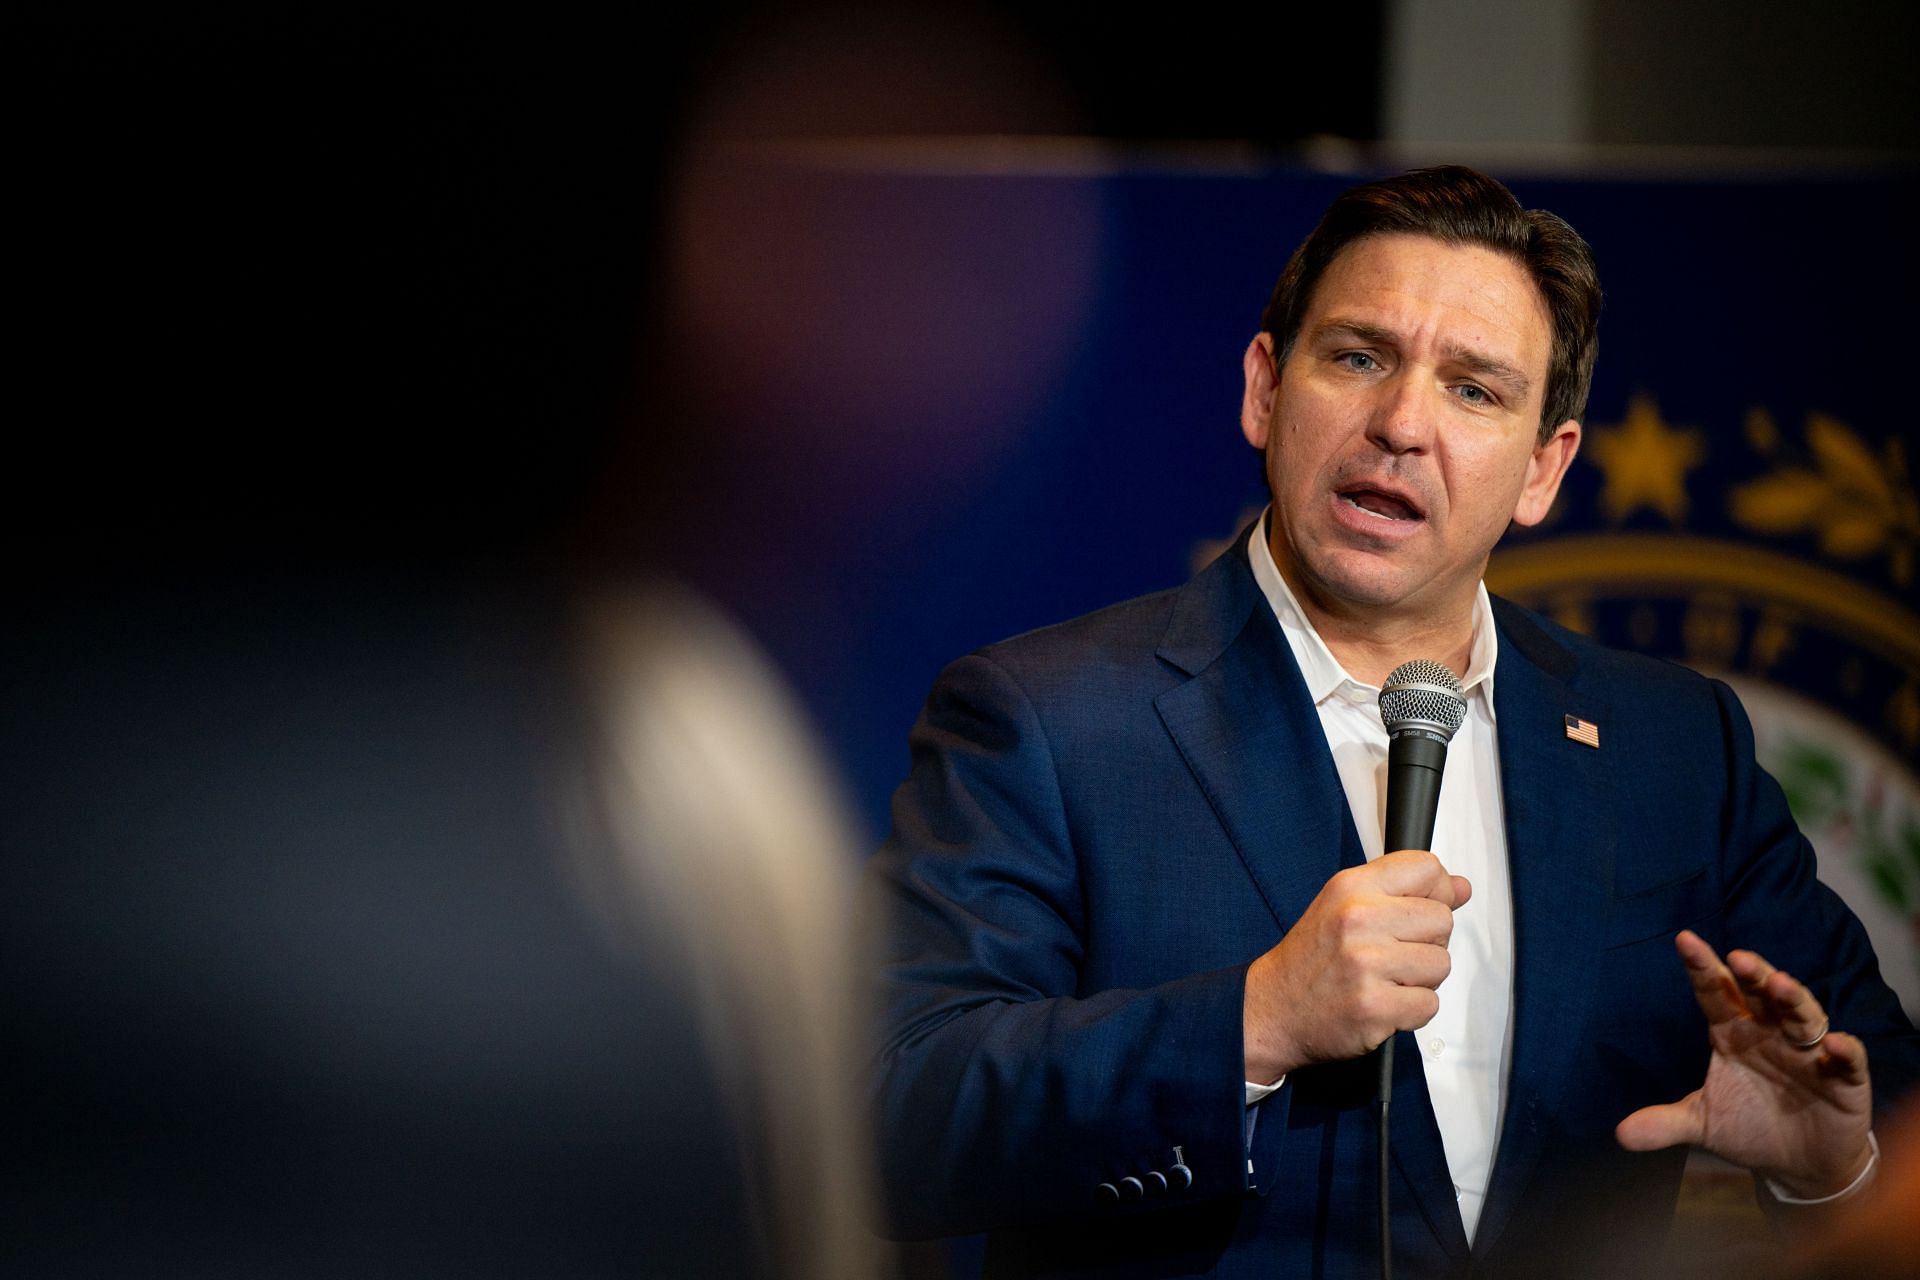 Florida Governor Ron DeSantis Campaigns For President In New Hampshire